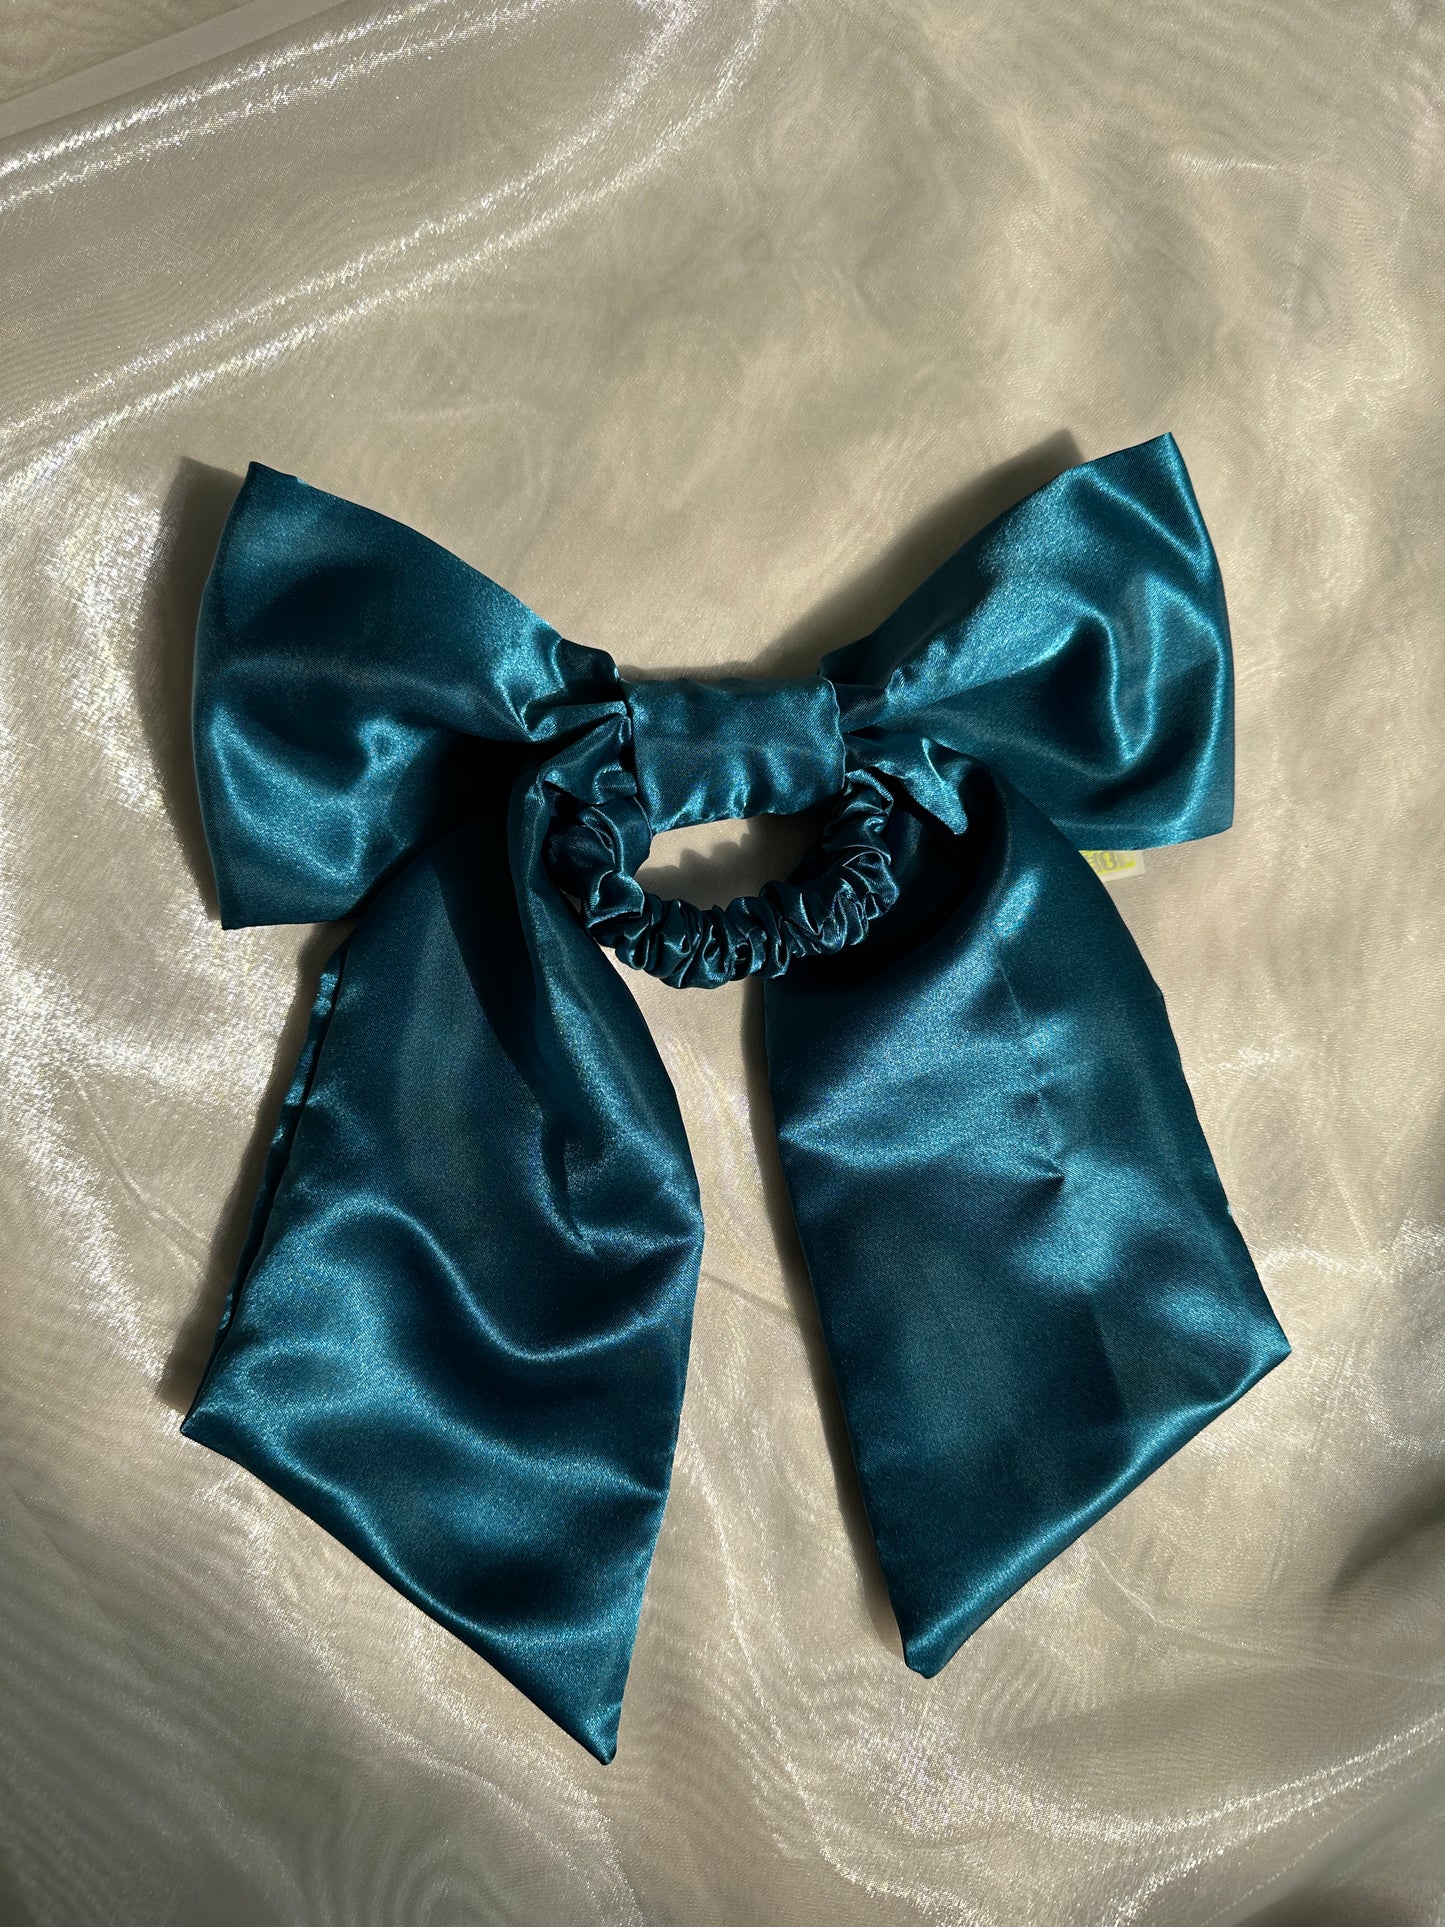 Giant Bow Scrunchie - color options